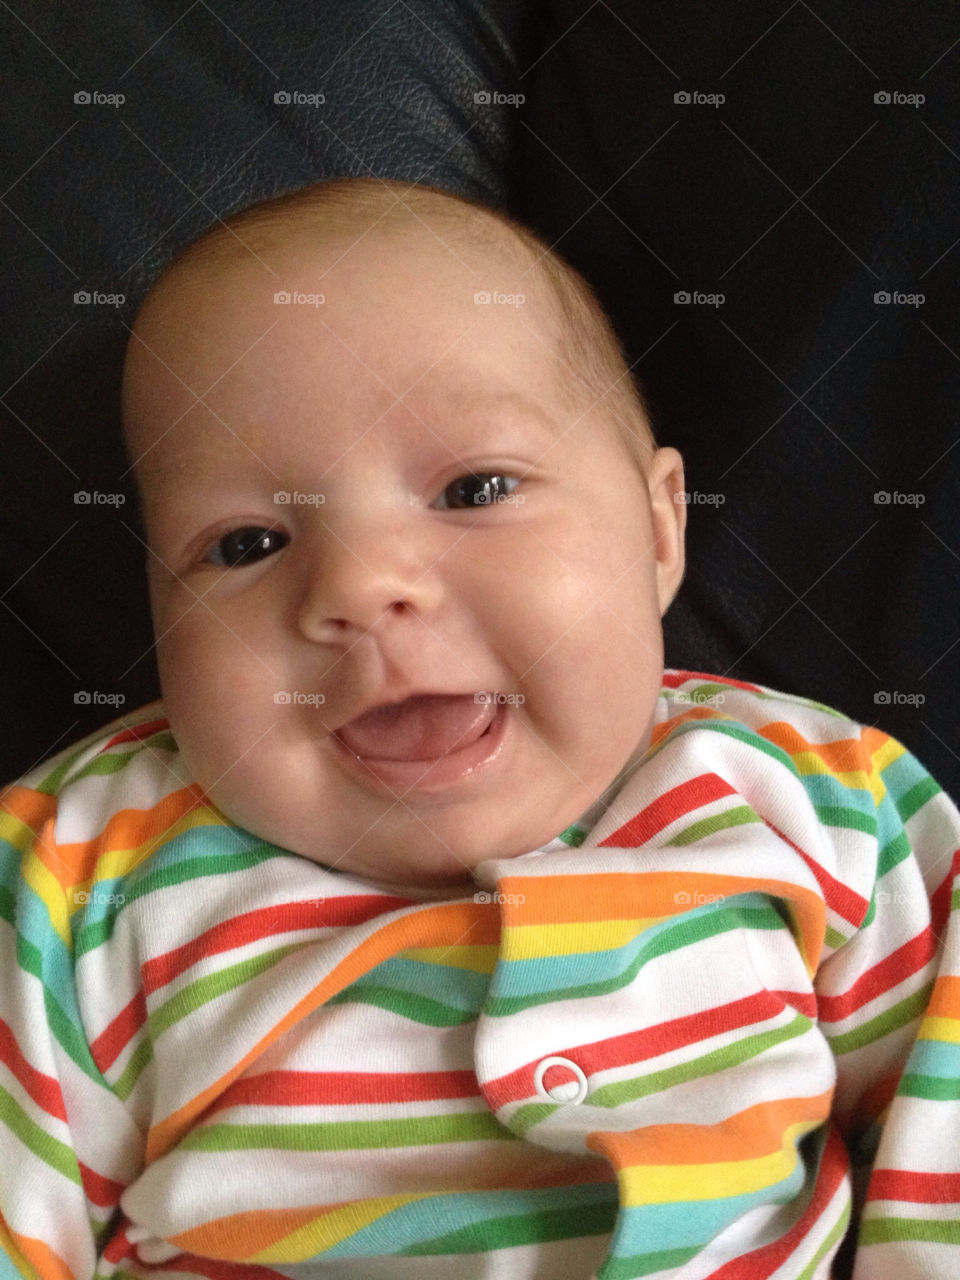 leicestershire england happy baby smiles by kris.folwell